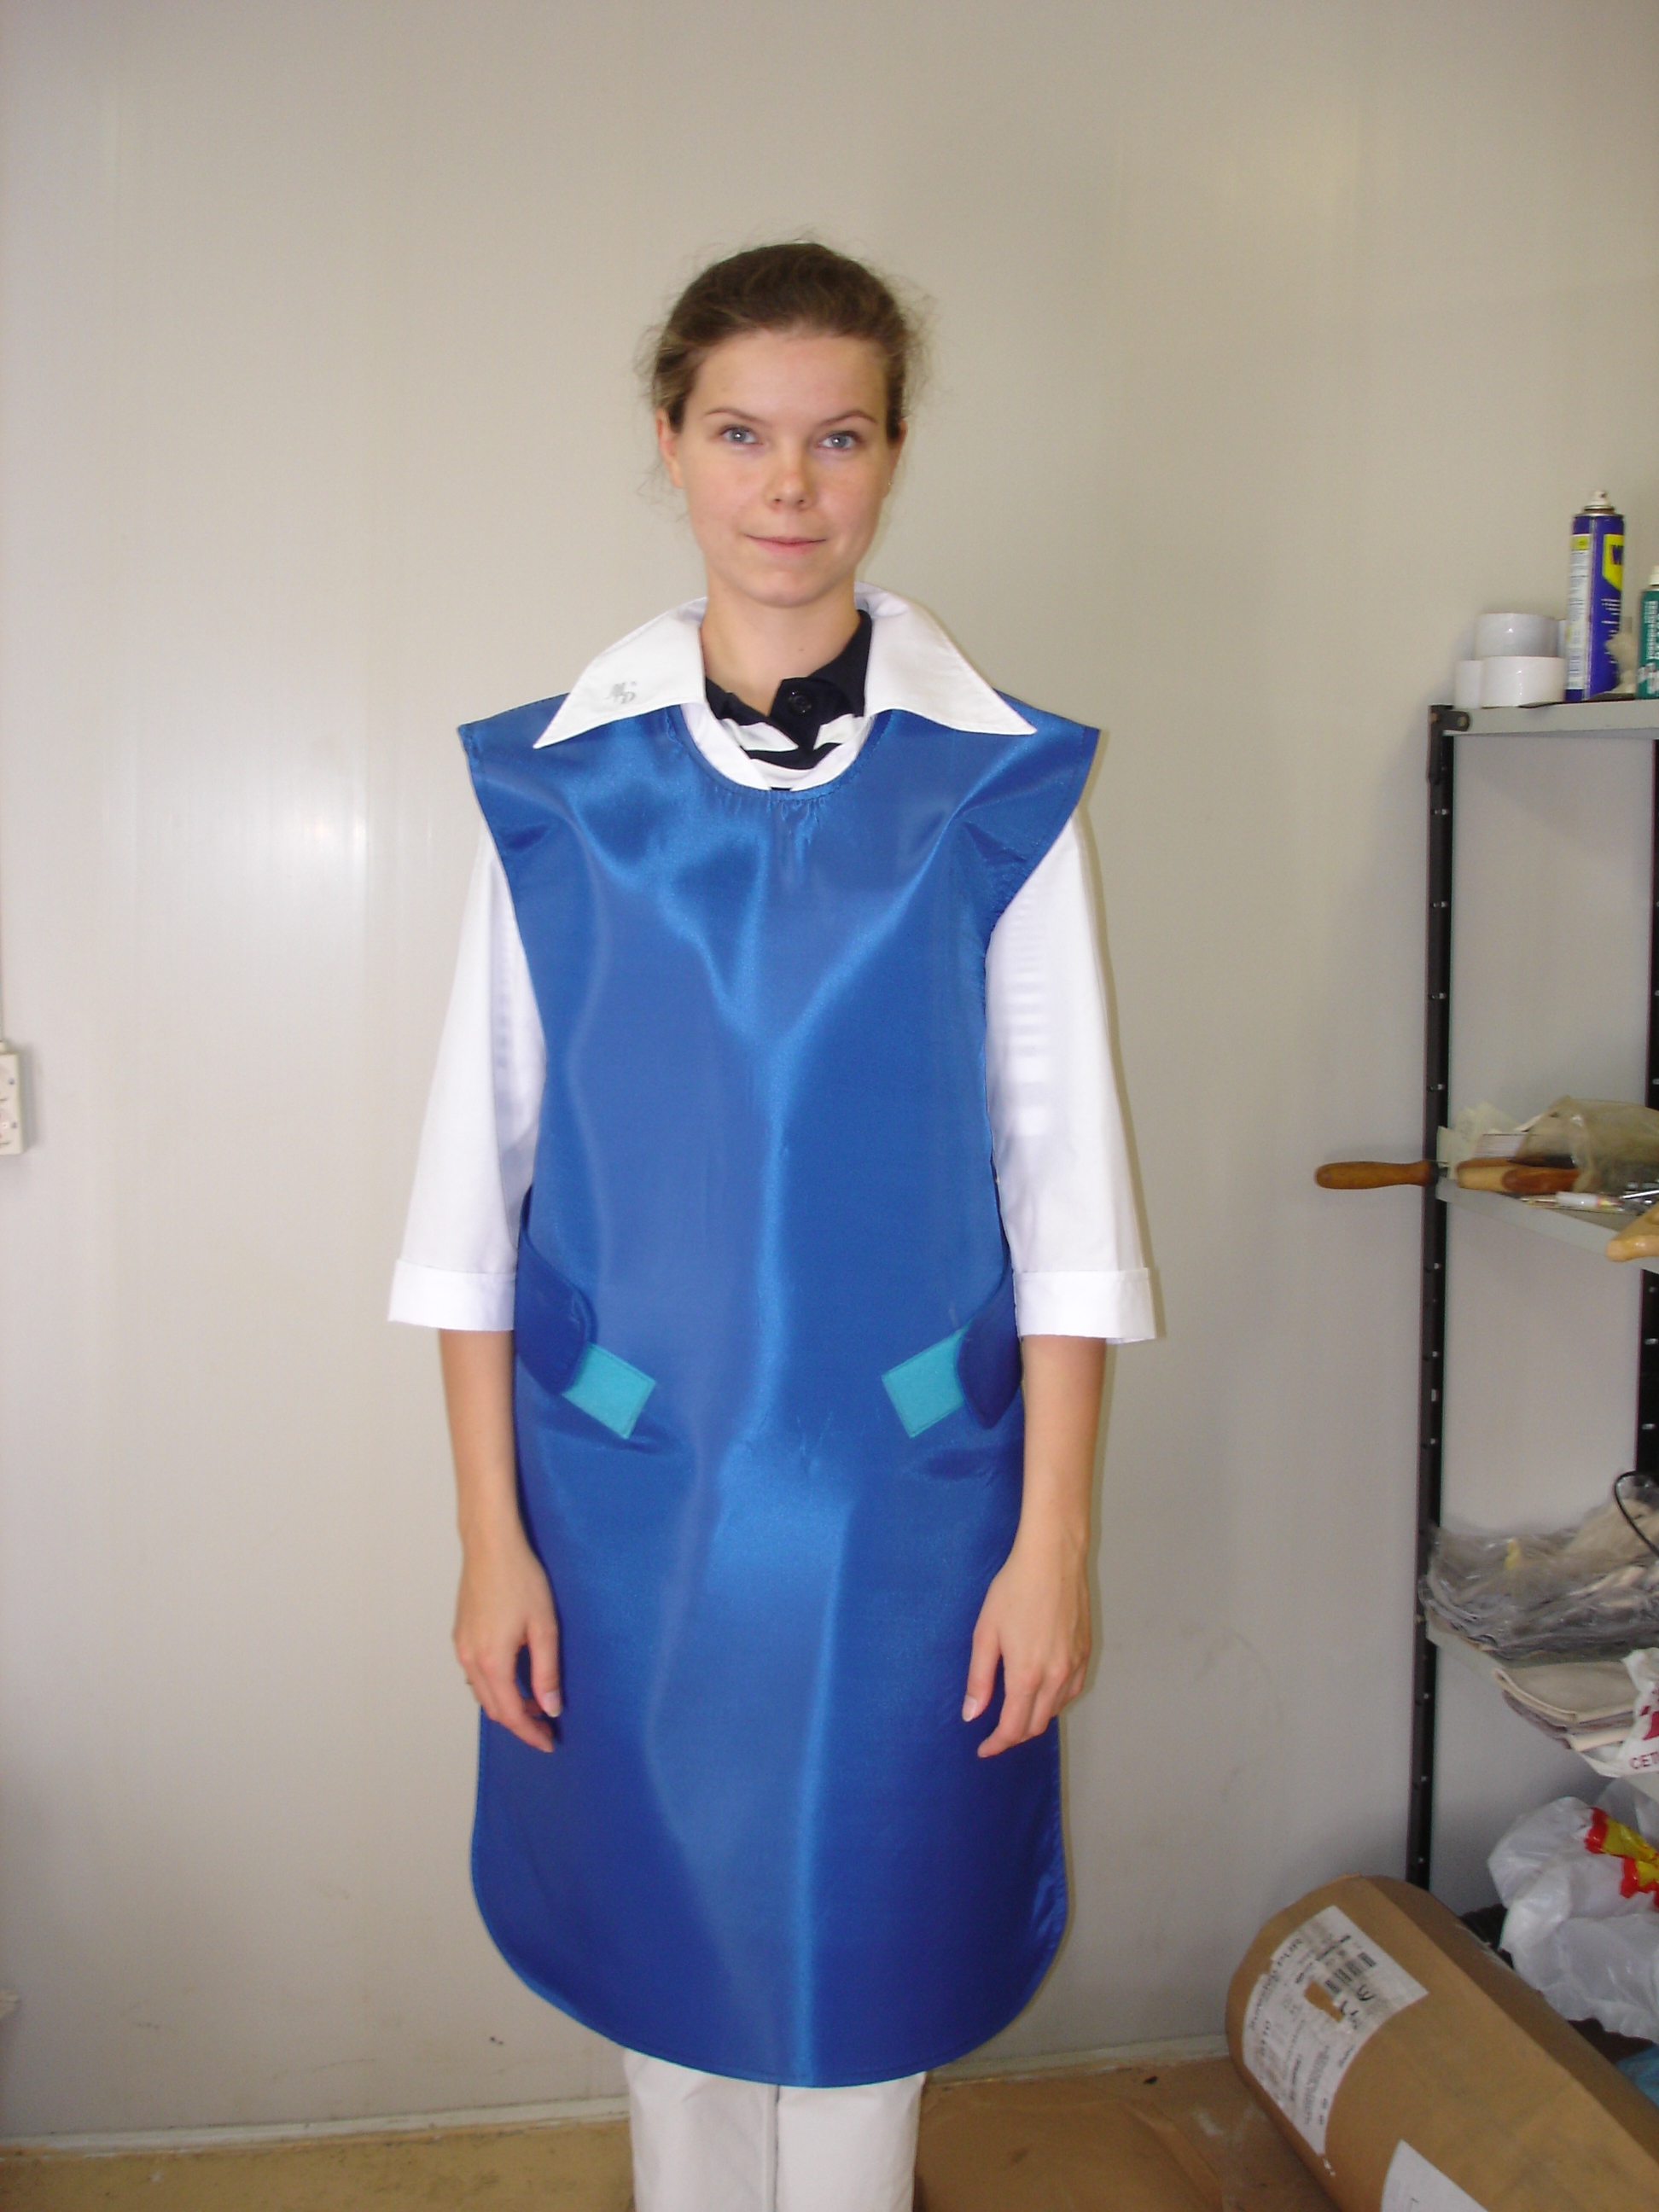 One-sided X-ray protective apron